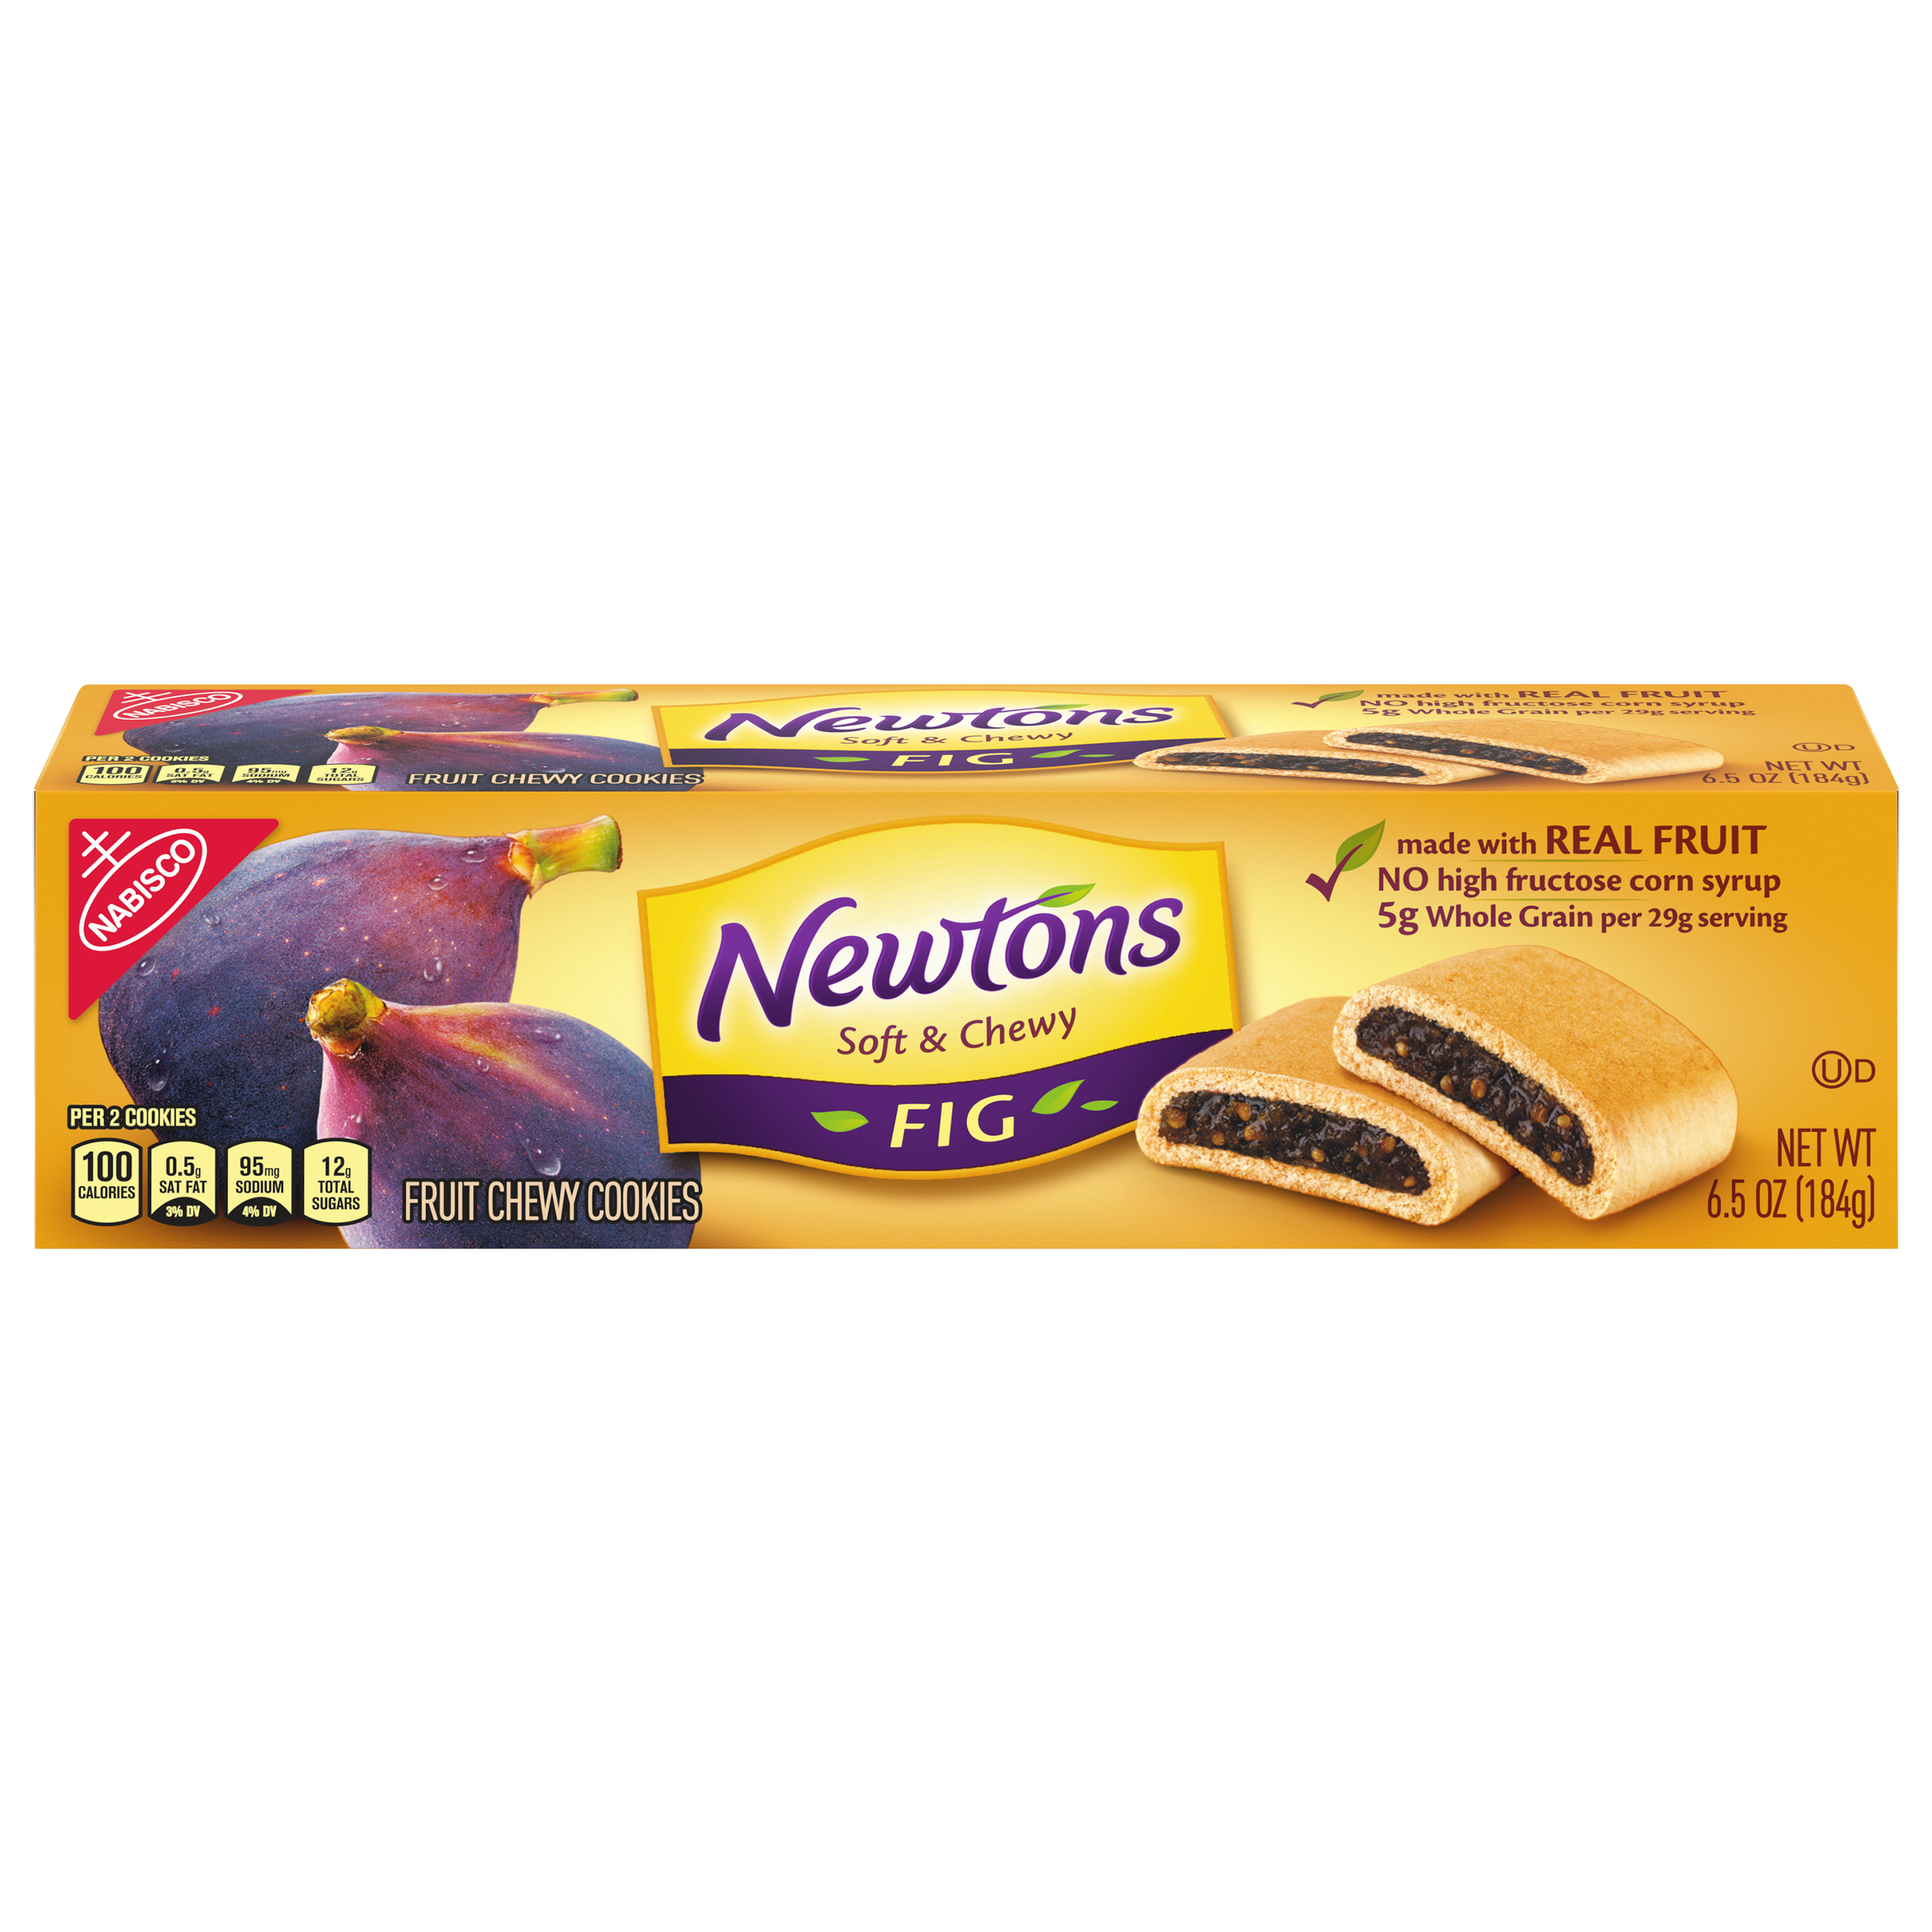 NEWTONS Fig Convenience Pack Cookies 6.5 oz